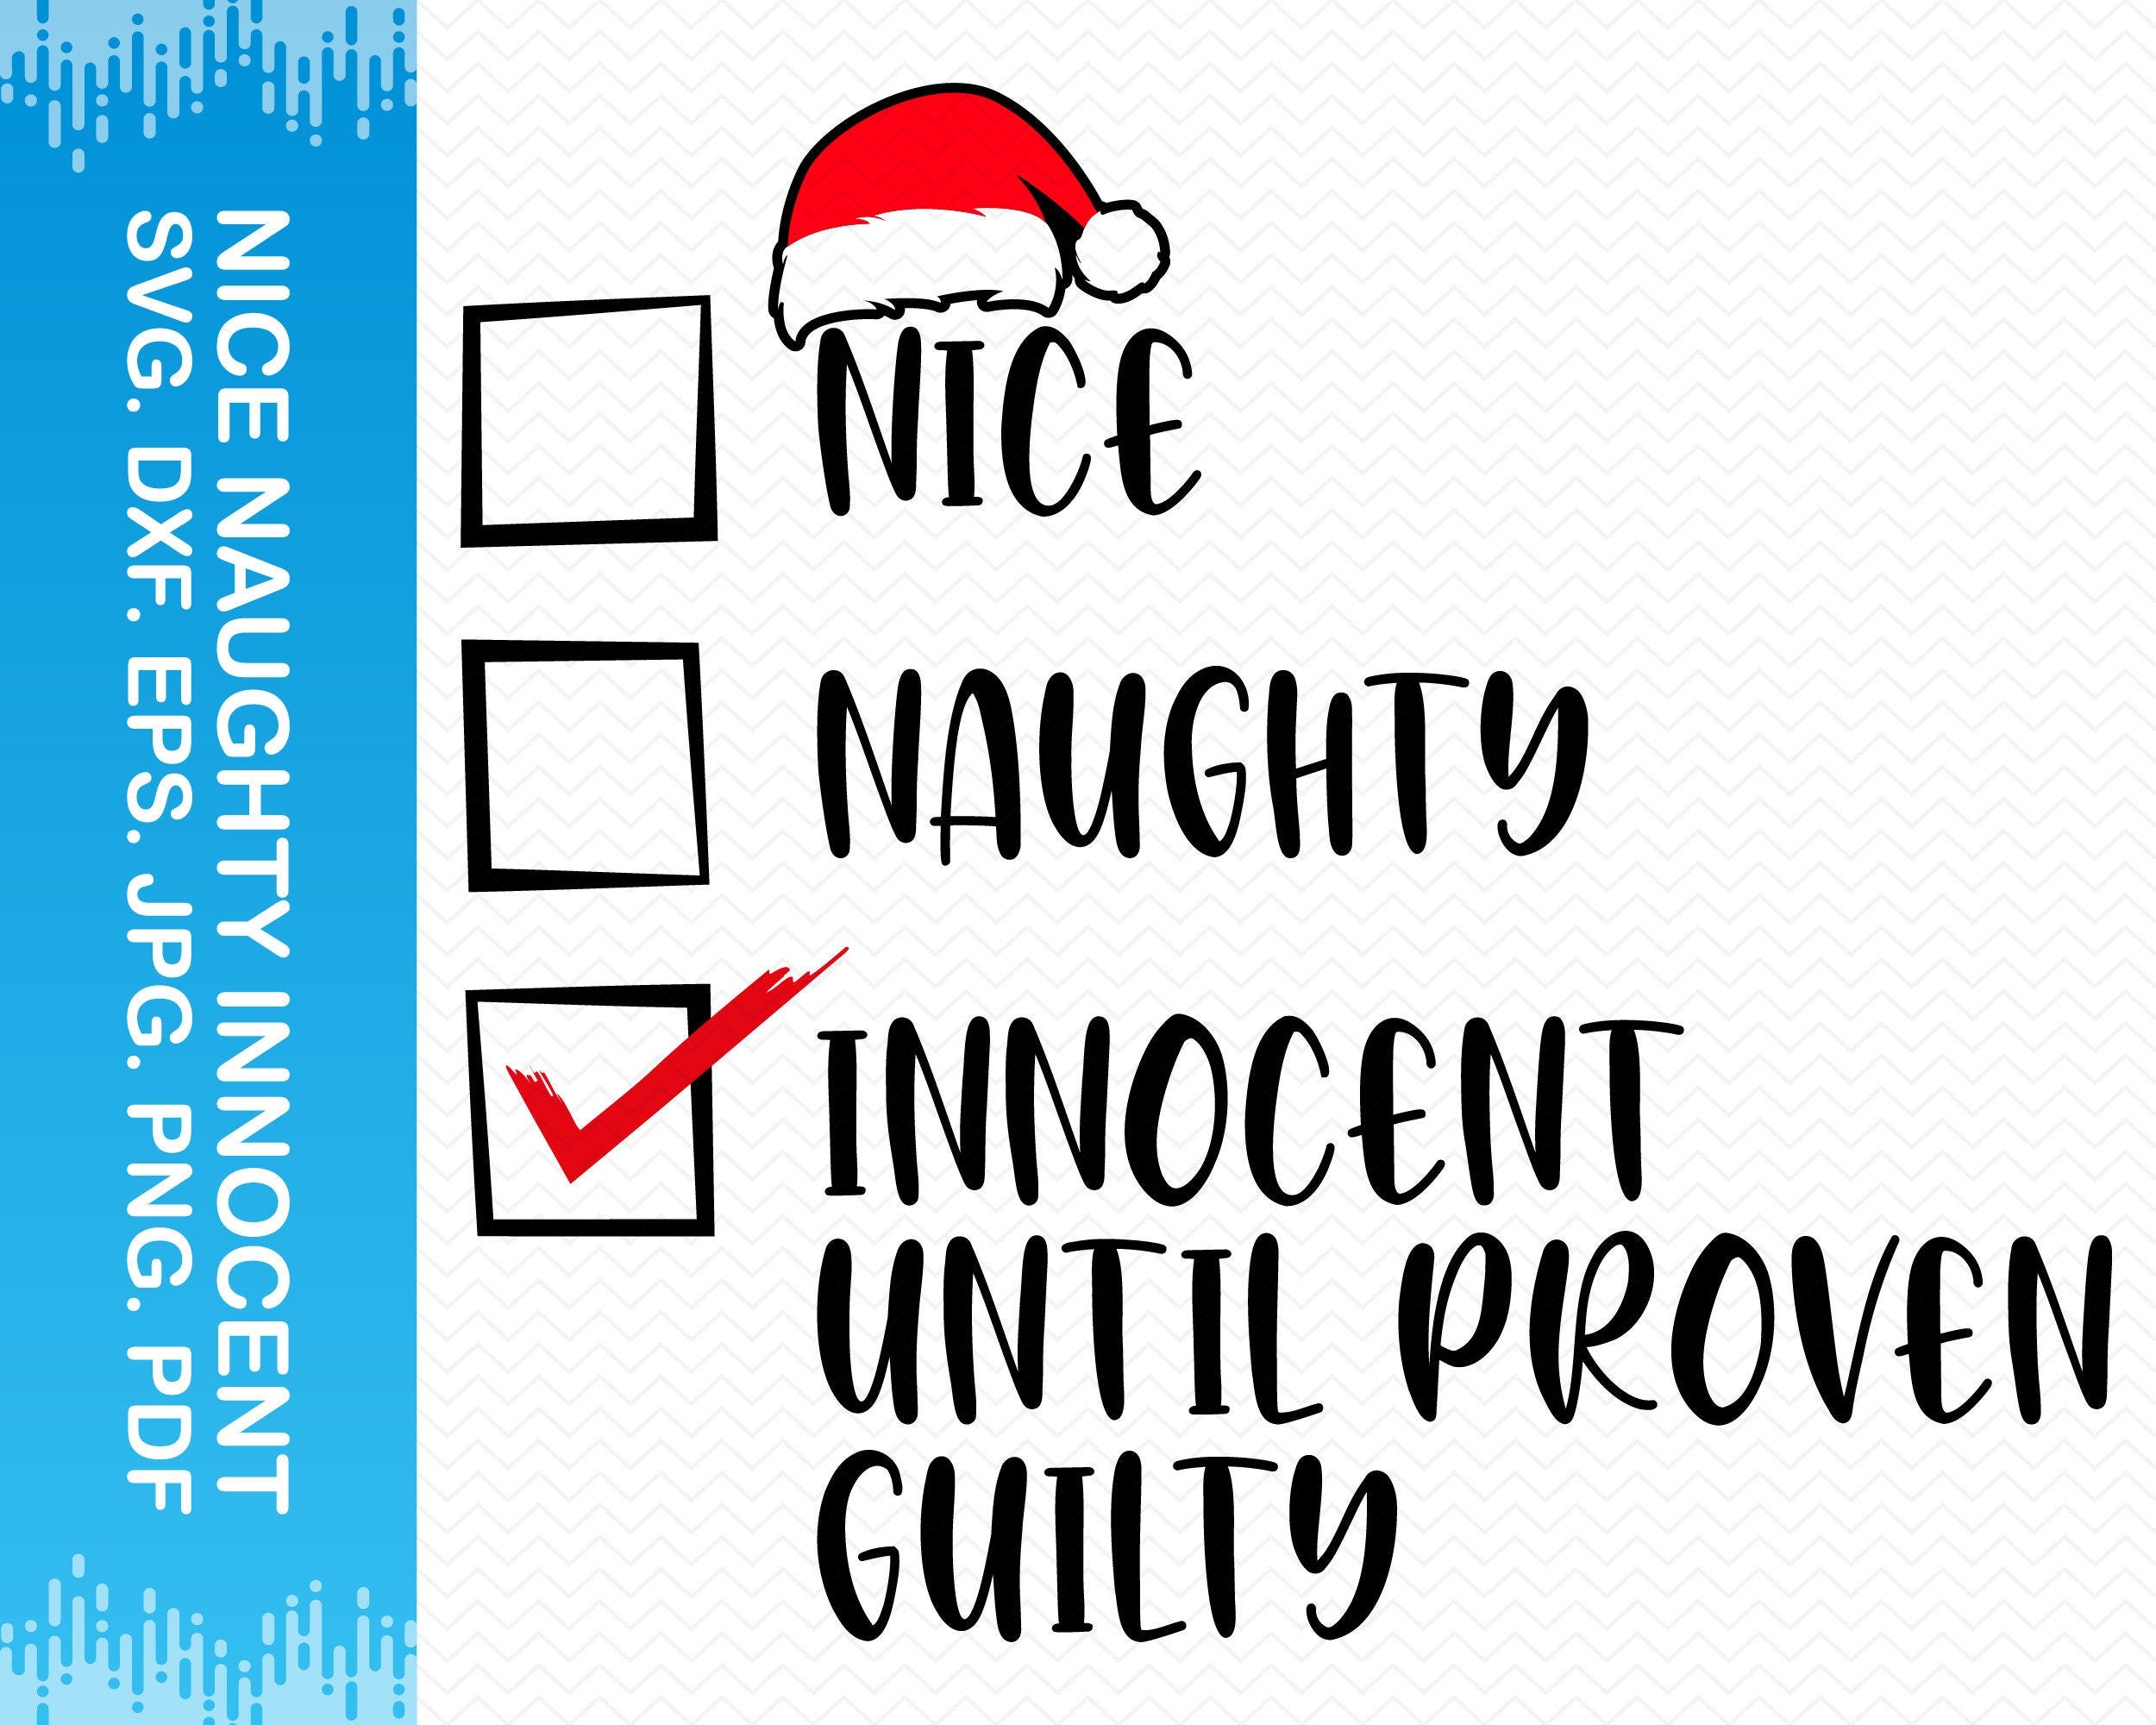 Nice Naughty Innocent Until Proven Guilty svg, Merry christmas svg, Funny svg christmas clipart, Christmas shirt svg, Cricut svg silhouette